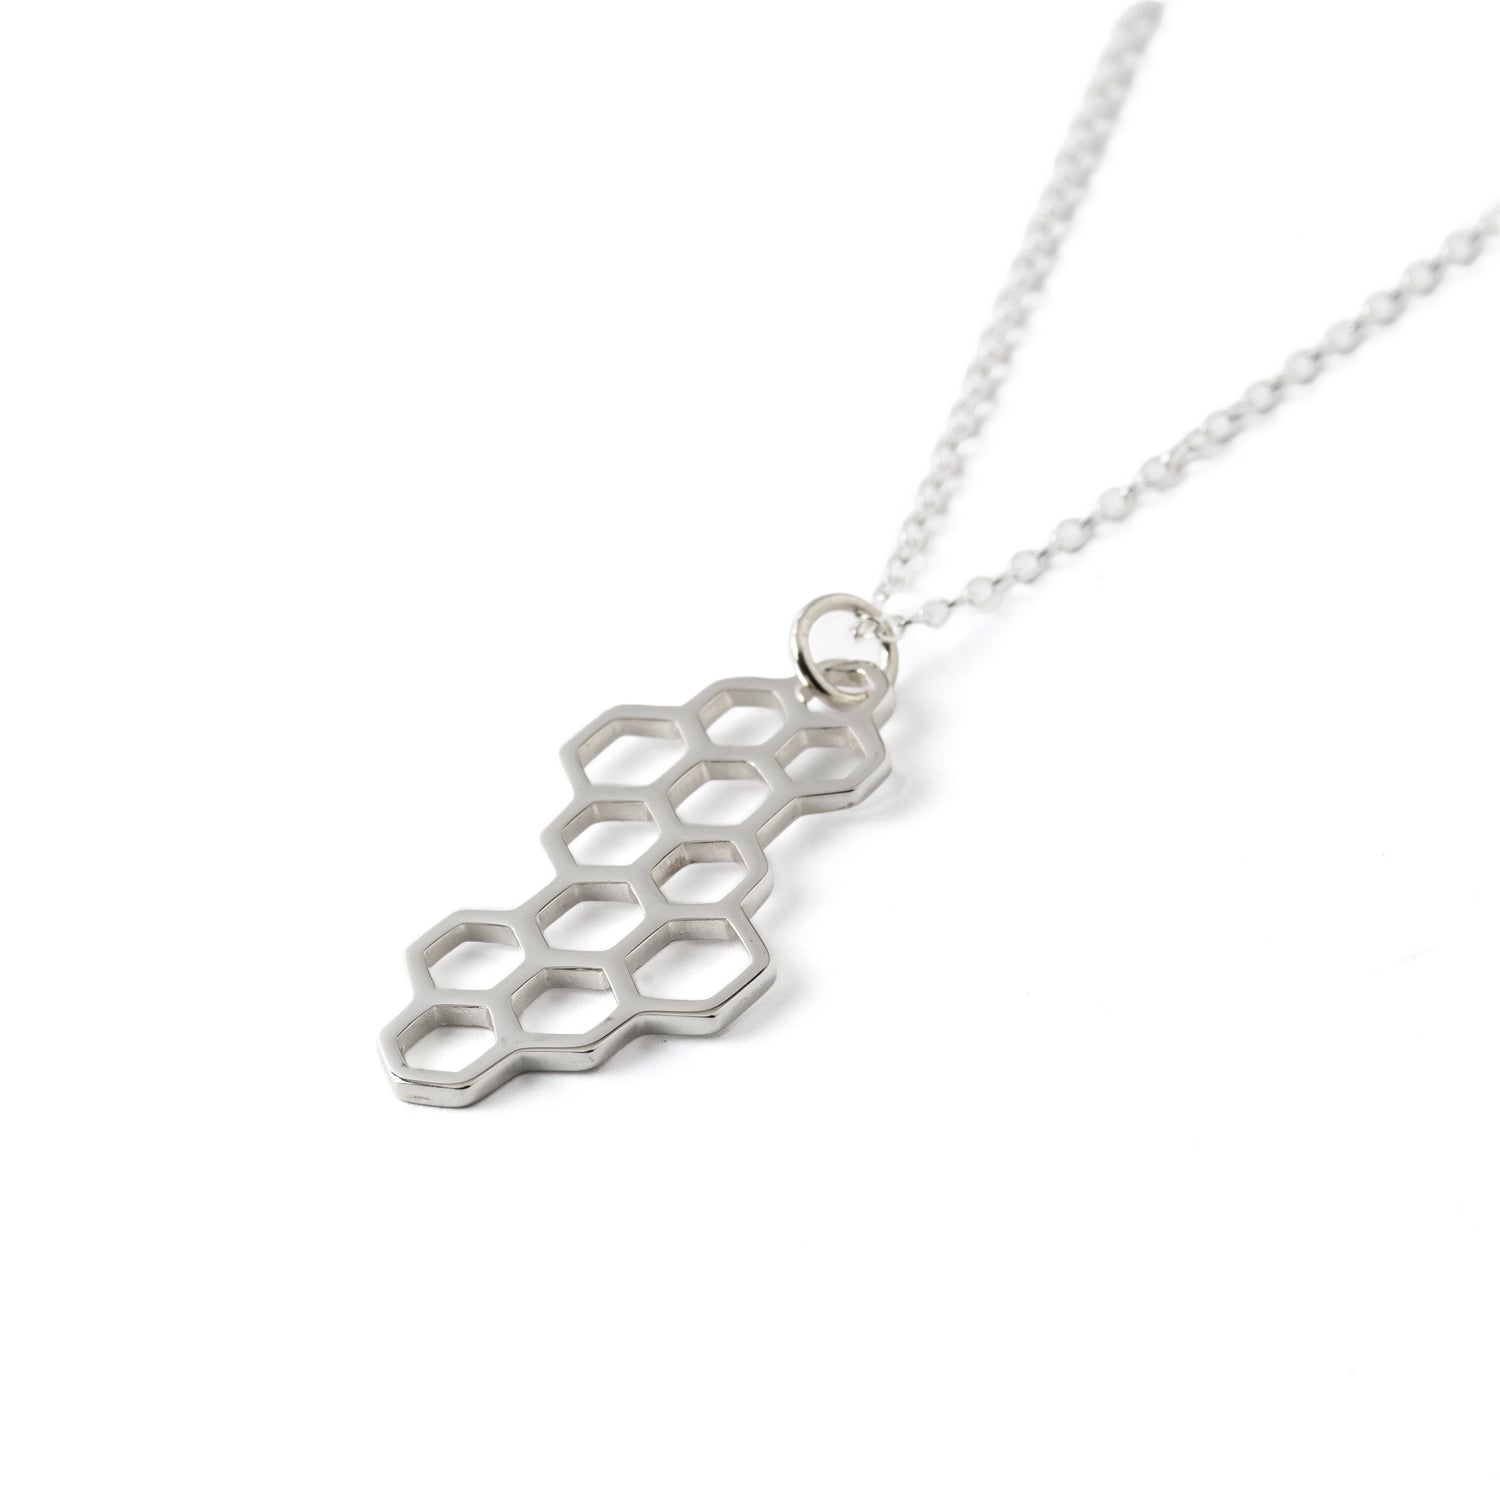 Honeycomb silver pendant necklace right side view